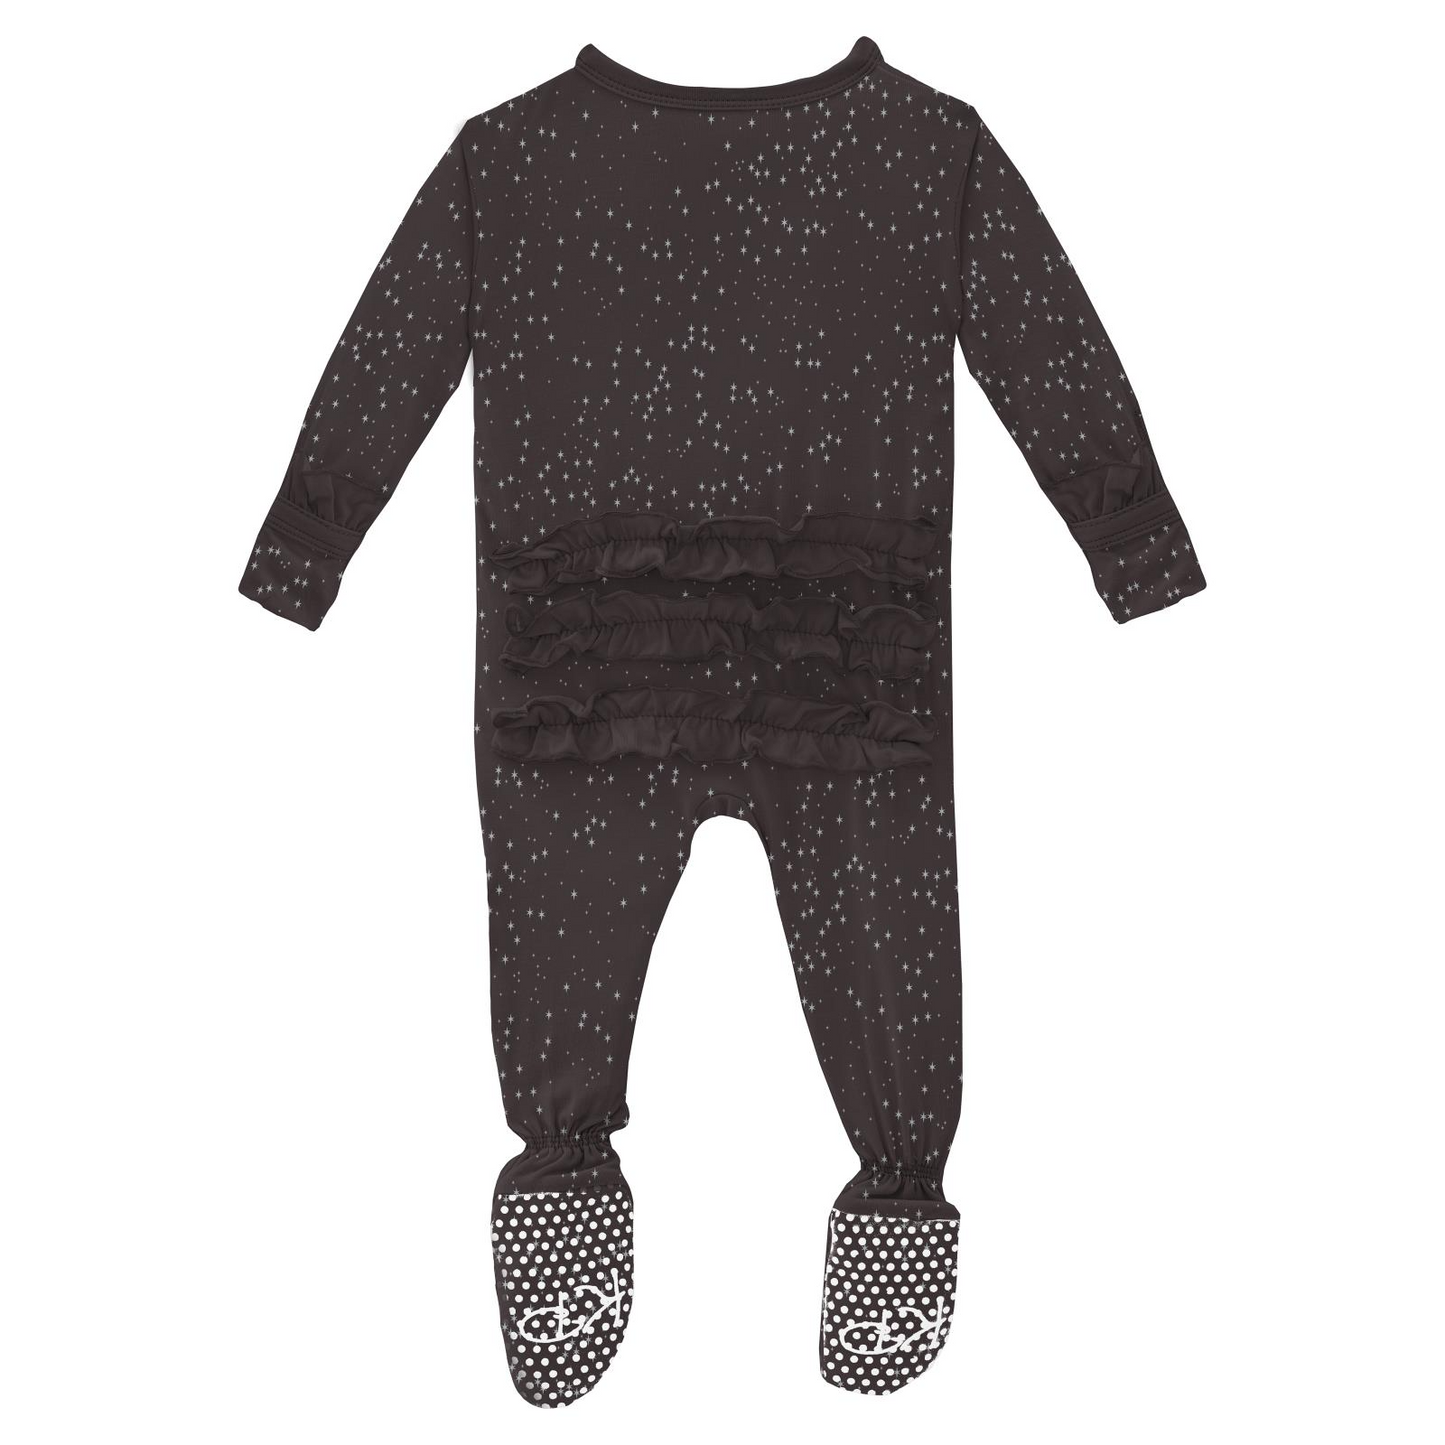 Kickee Pants Print Classic Ruffle Footie with Snaps: Midnight Foil Constellations